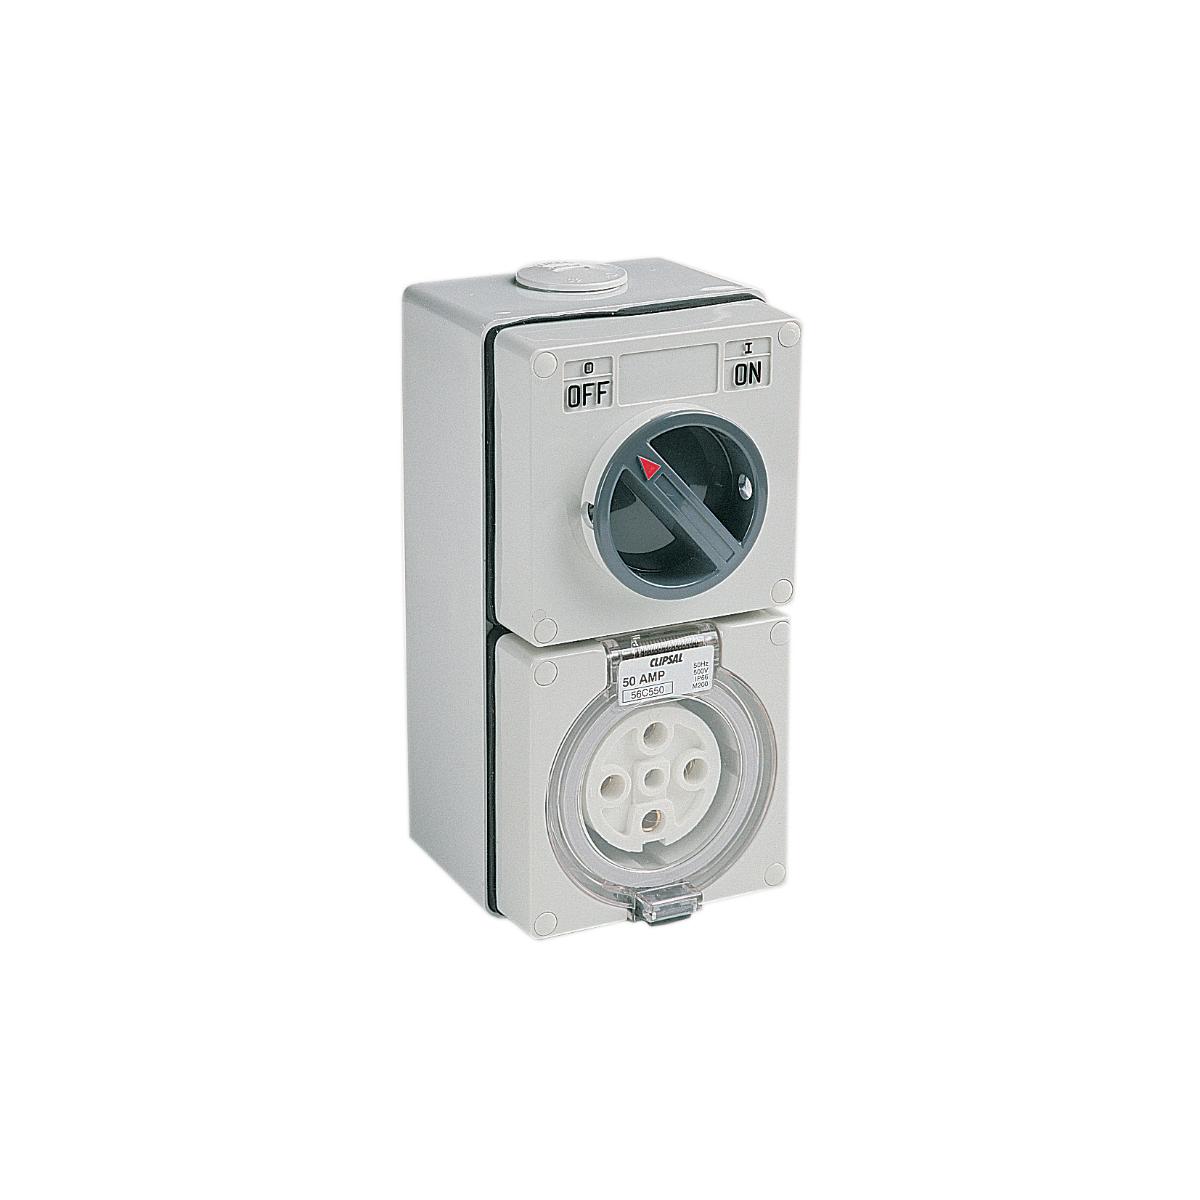 OUTLET SWITCHED IP66 5PIN 50A 500V R/OR